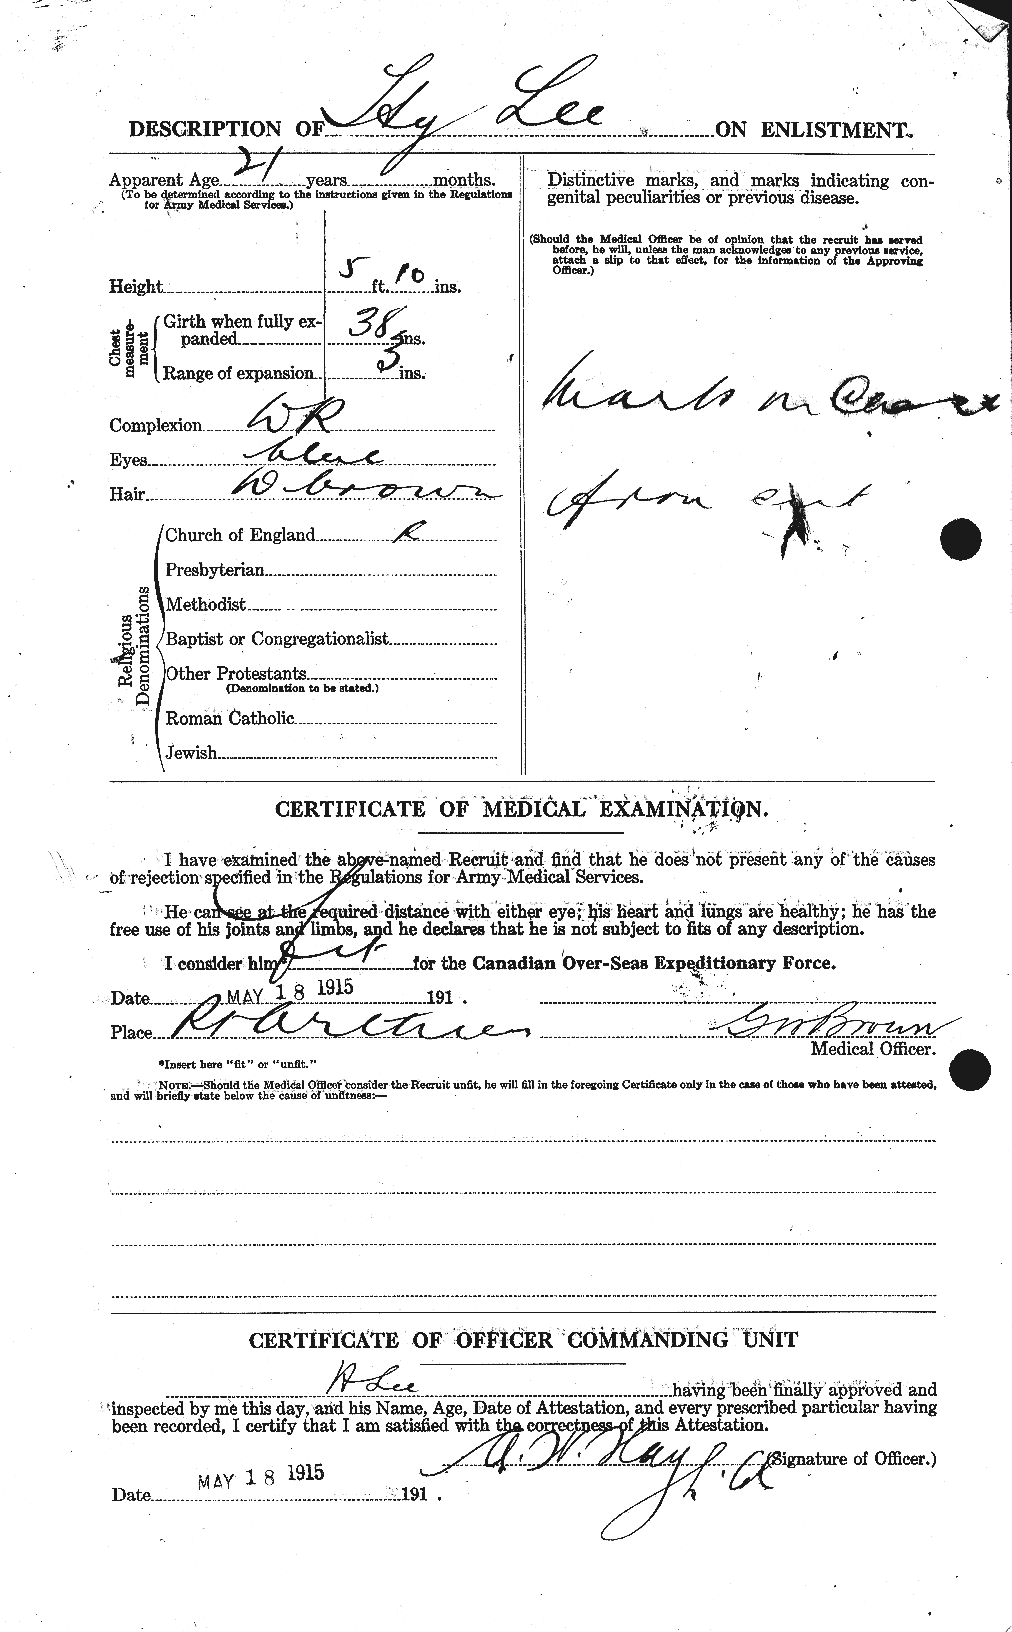 Personnel Records of the First World War - CEF 456827b